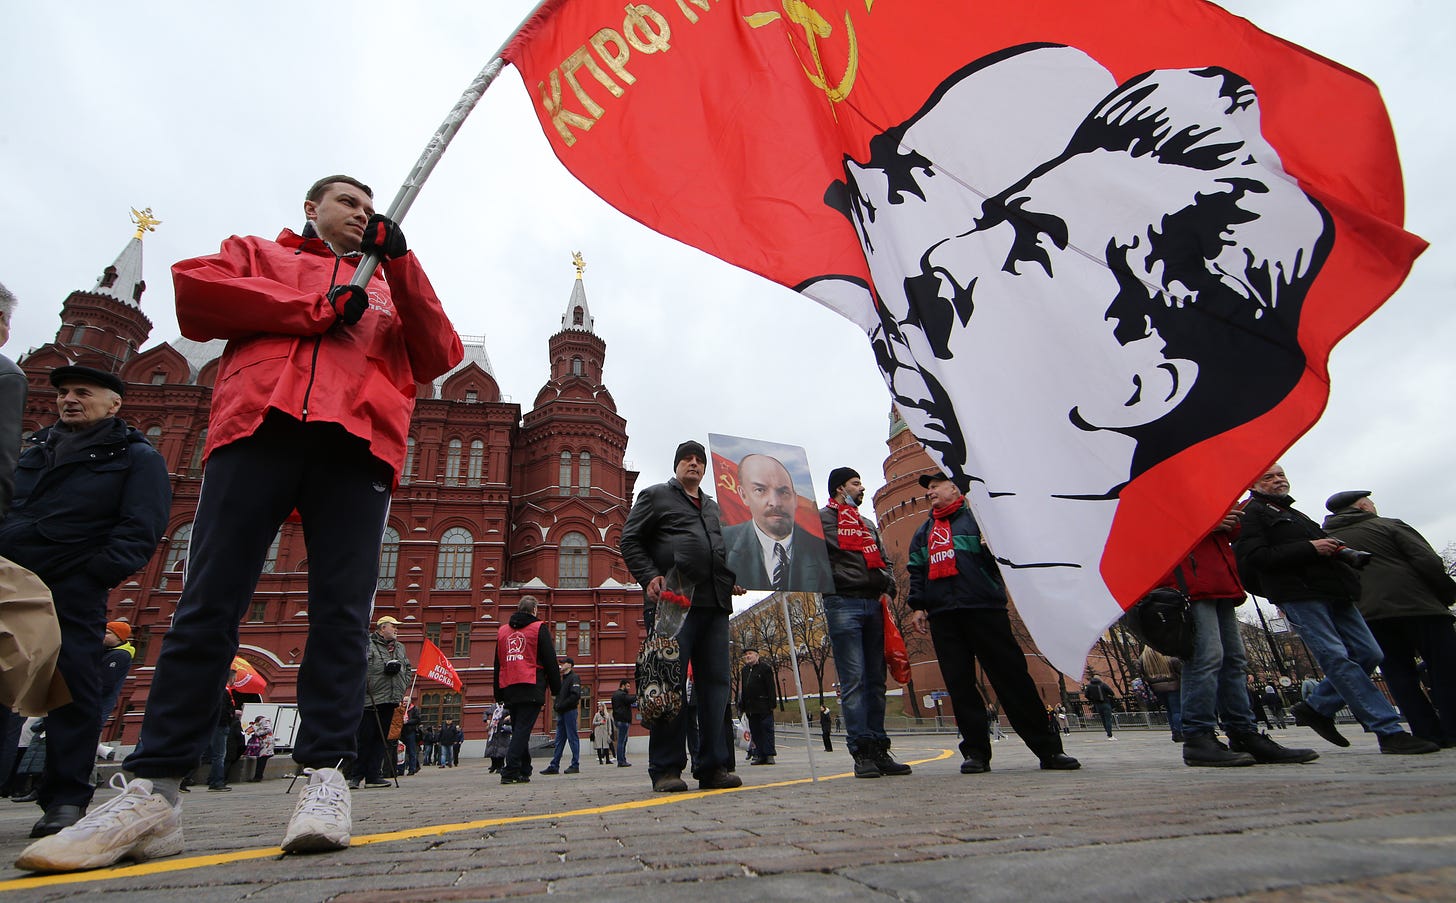 A supporter of Russian Communist Party holds a flag with portrait of Soviet Union leaders Vladimir Lenin and Joseph Stalin on April 22, 2022 in Moscow, Russia. Hundreds communists took part in the rally at Moscow's Red Square near the Kremlin marking the birthday of revolutionary, political theorist and founding head of government of Soviet Russia Vladimir Lenin. (Photo by Konstantin Zavrazhin/Getty Images)